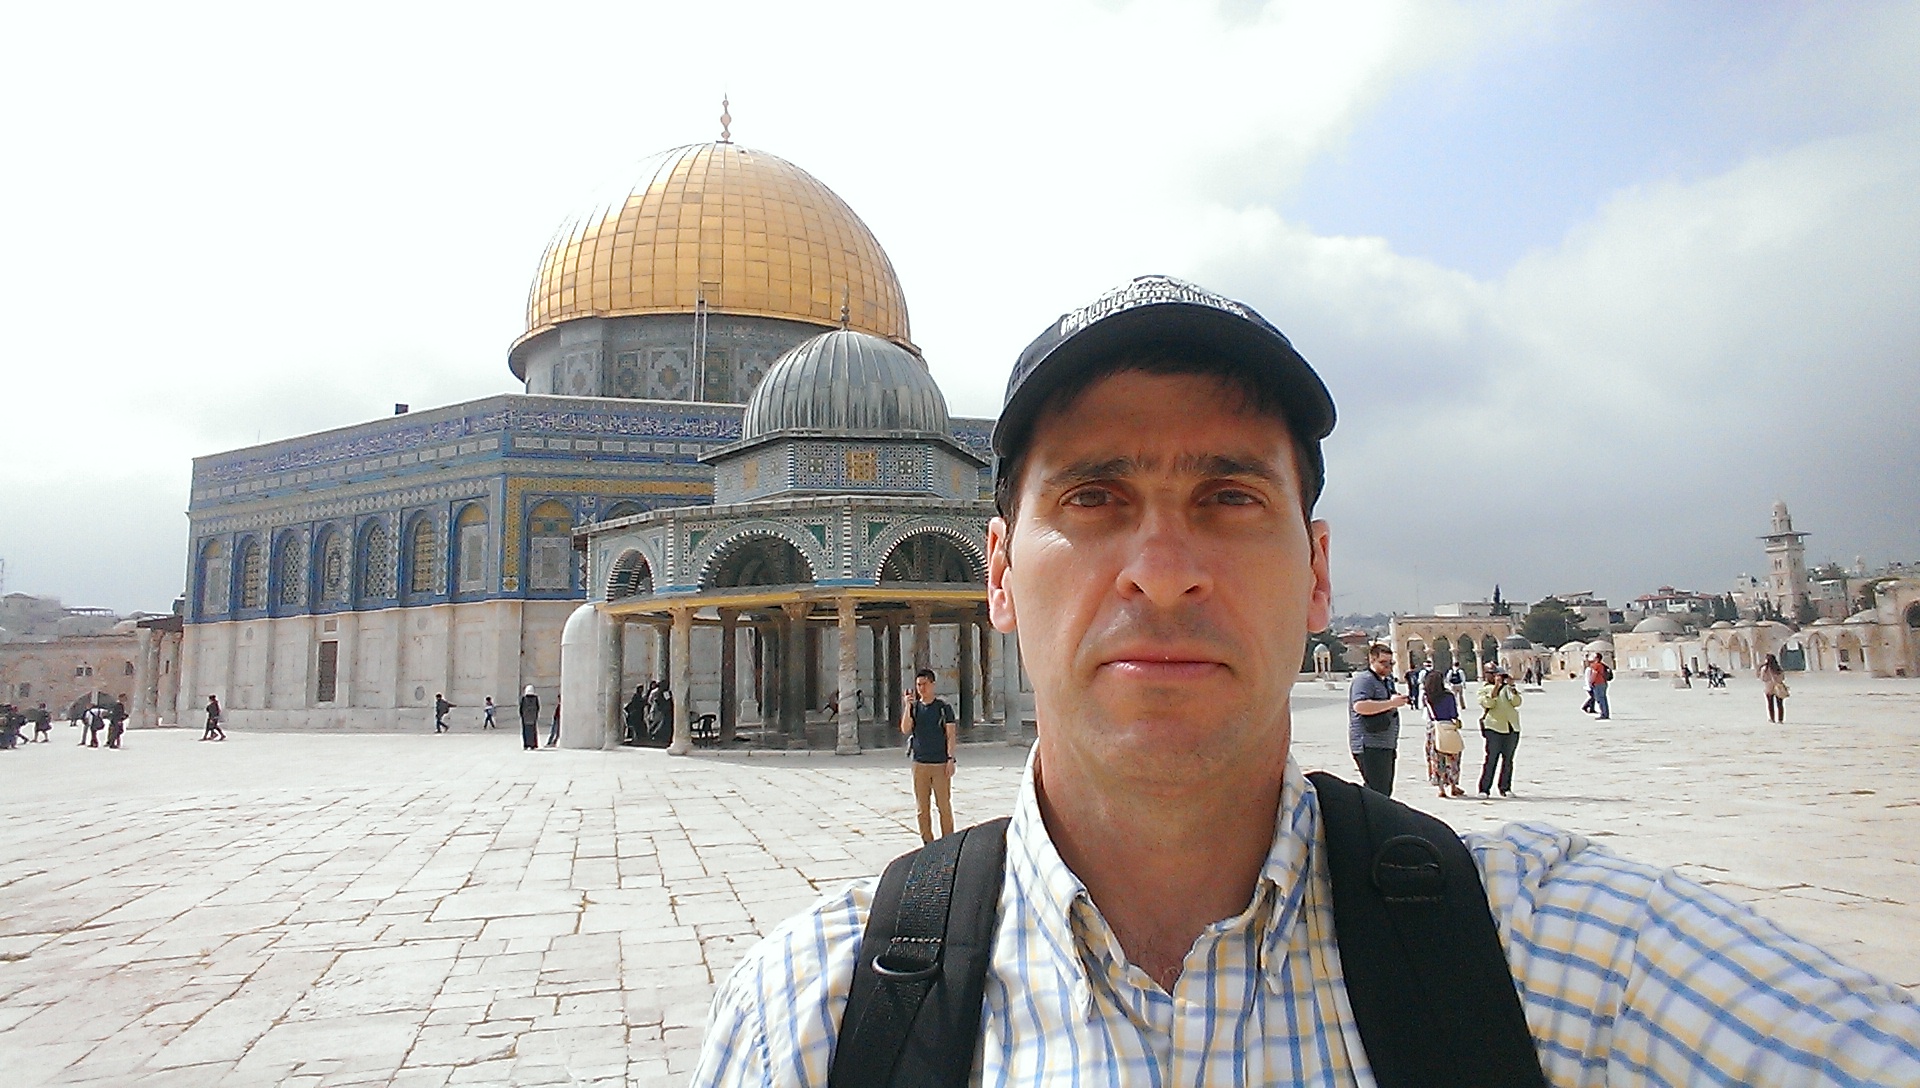 Dome of Rock and Dave